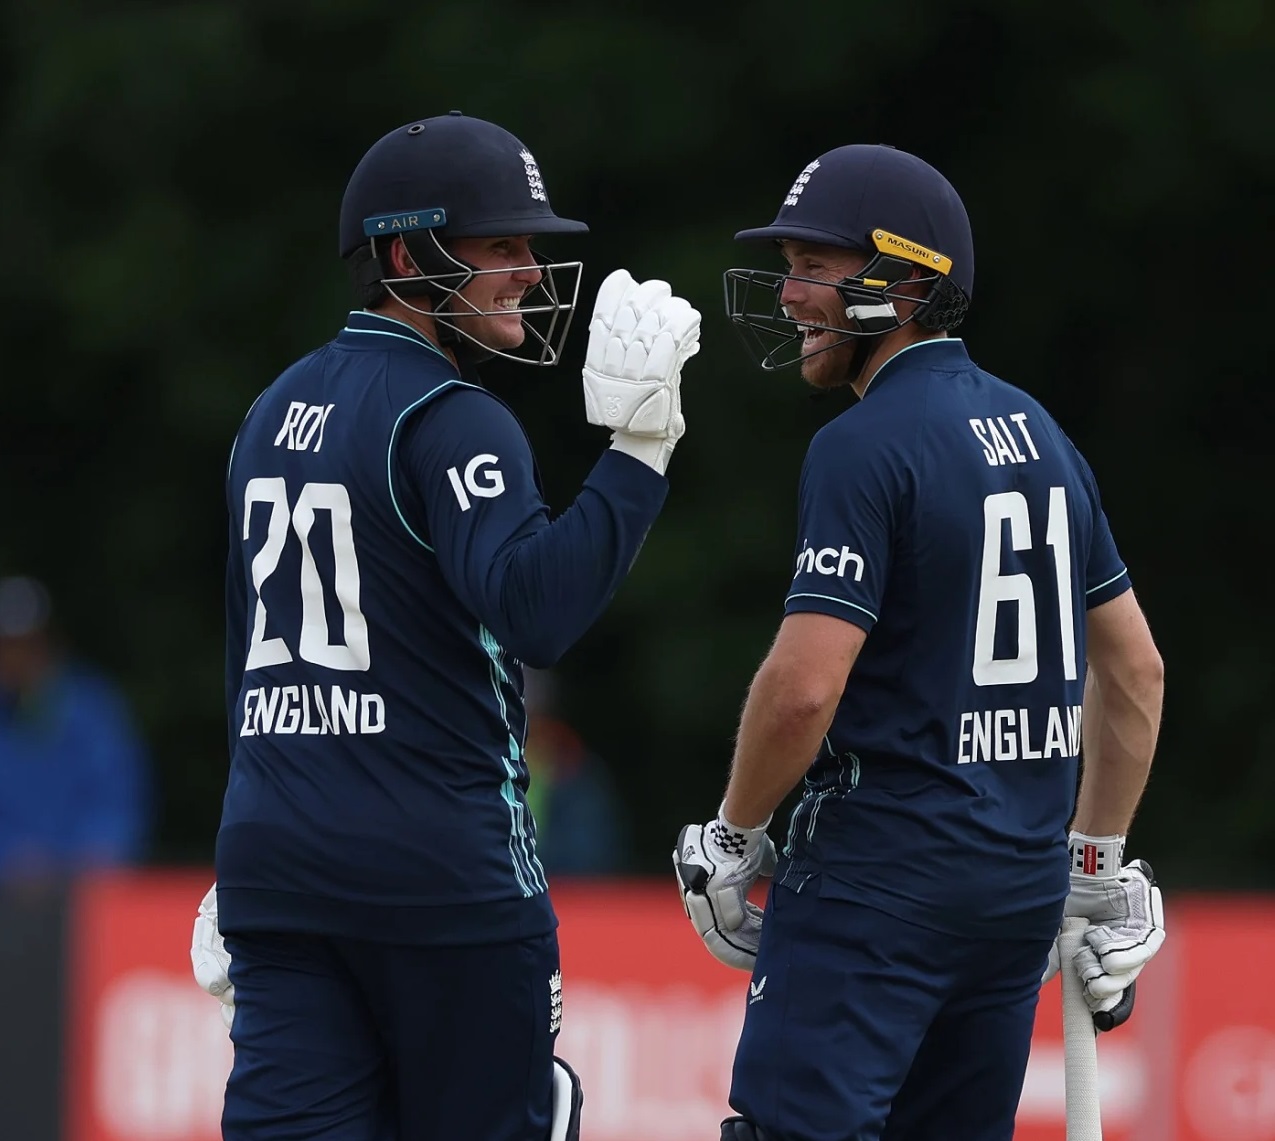 NED vs ENG LIVE: Jason Roy, Philip Salt power England to 6-wicket win over Netherlands, seal series 2-0: Check NED vs ENG 2nd ODI Highlights